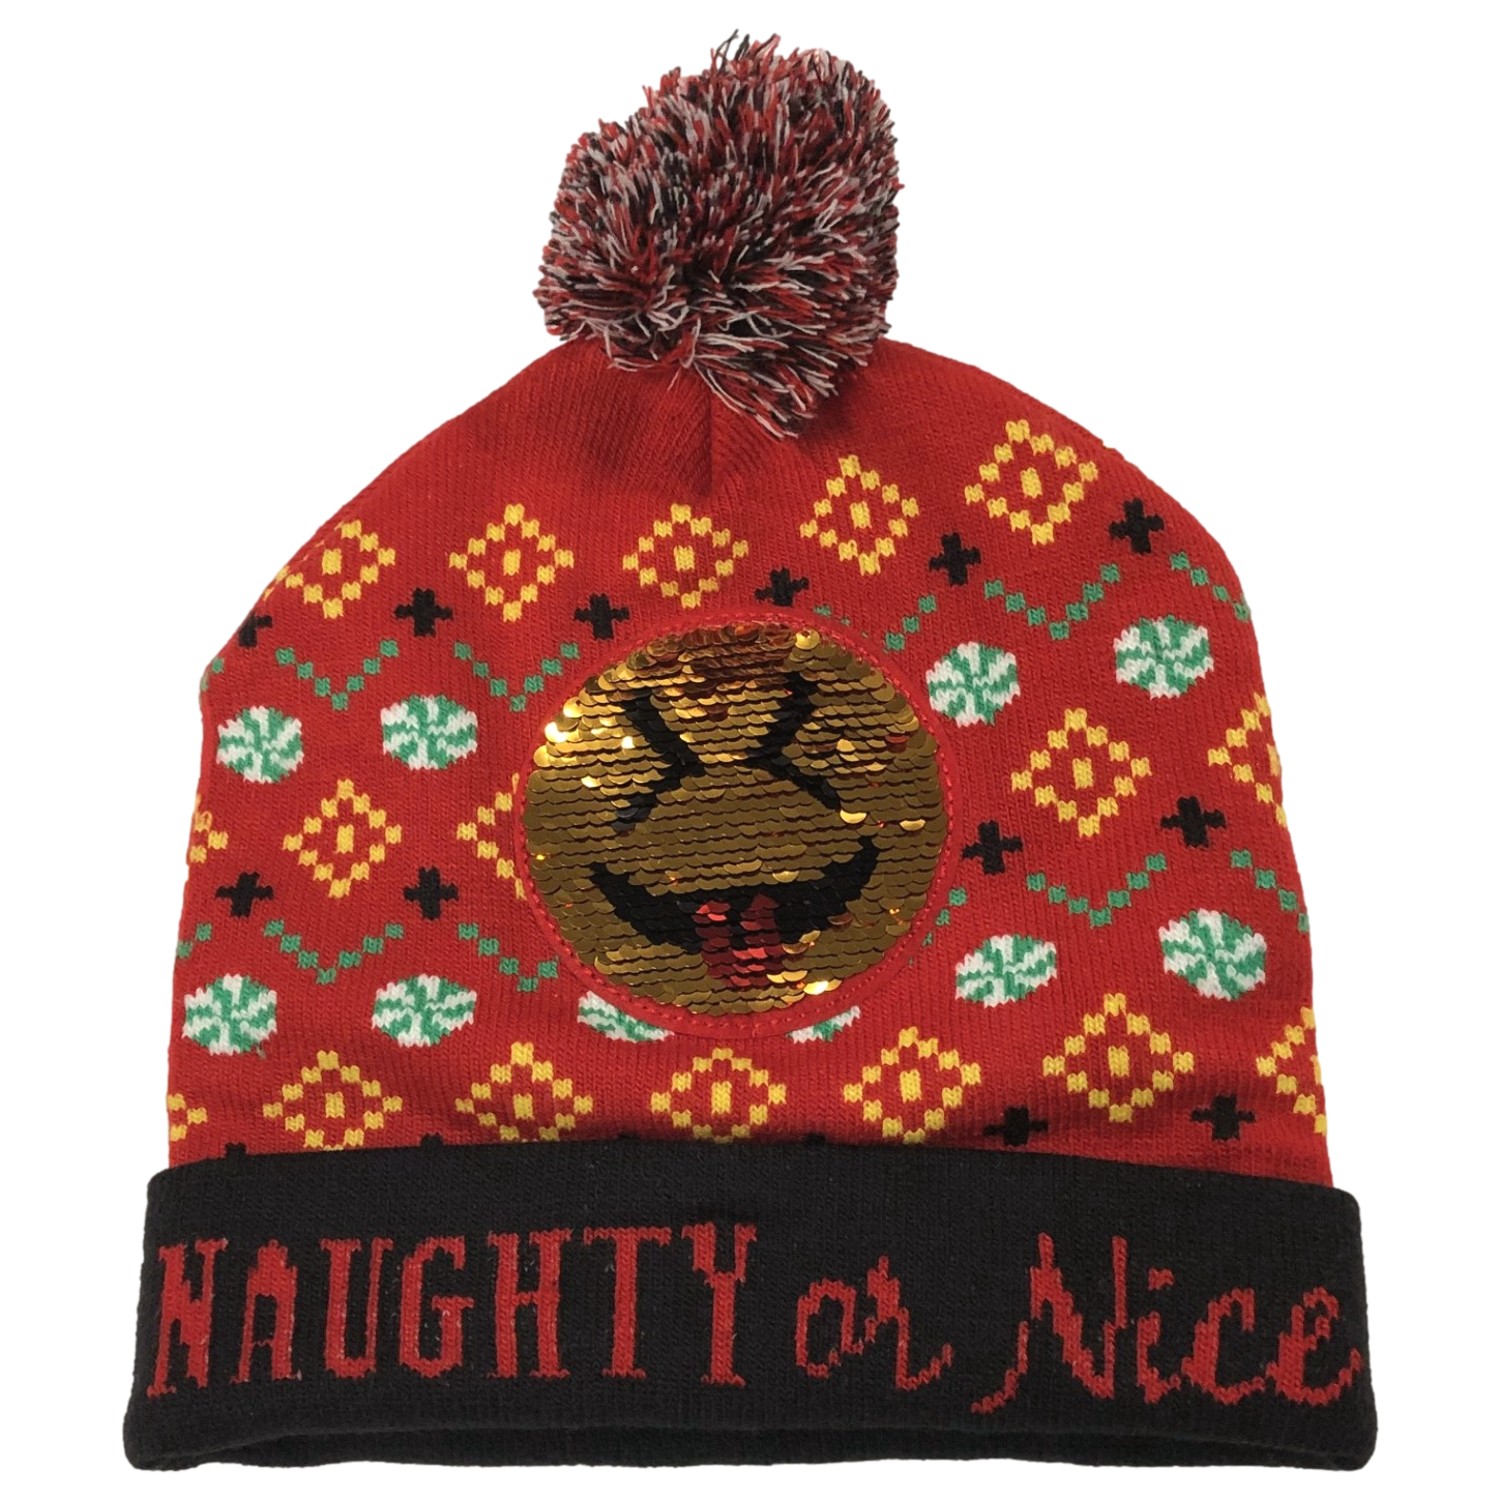 Mens & Womens Red Flip Sequin Naughty Or Nice Christmas Holiday Cap Beanie Hat - image 1 of 2